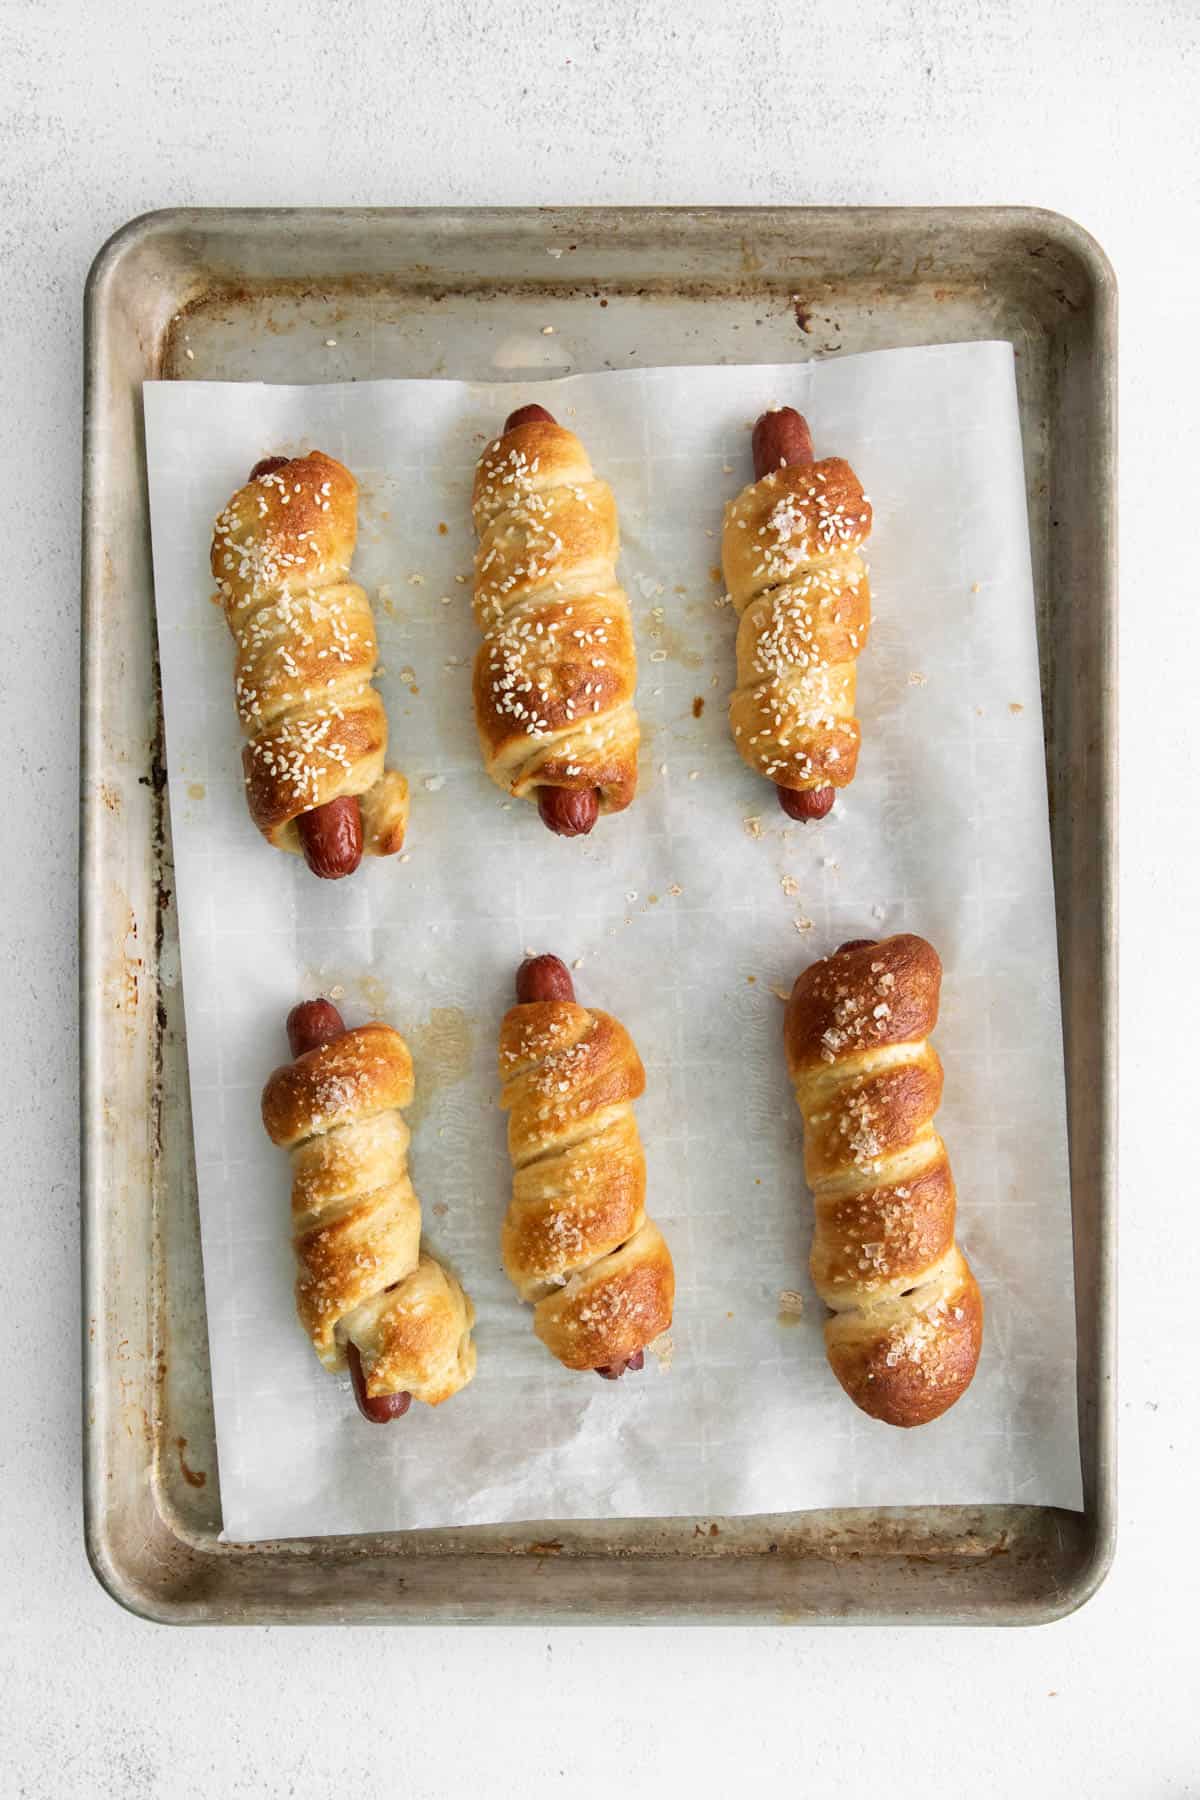 Baked pretzel dogs topped with salt on a baking sheet.